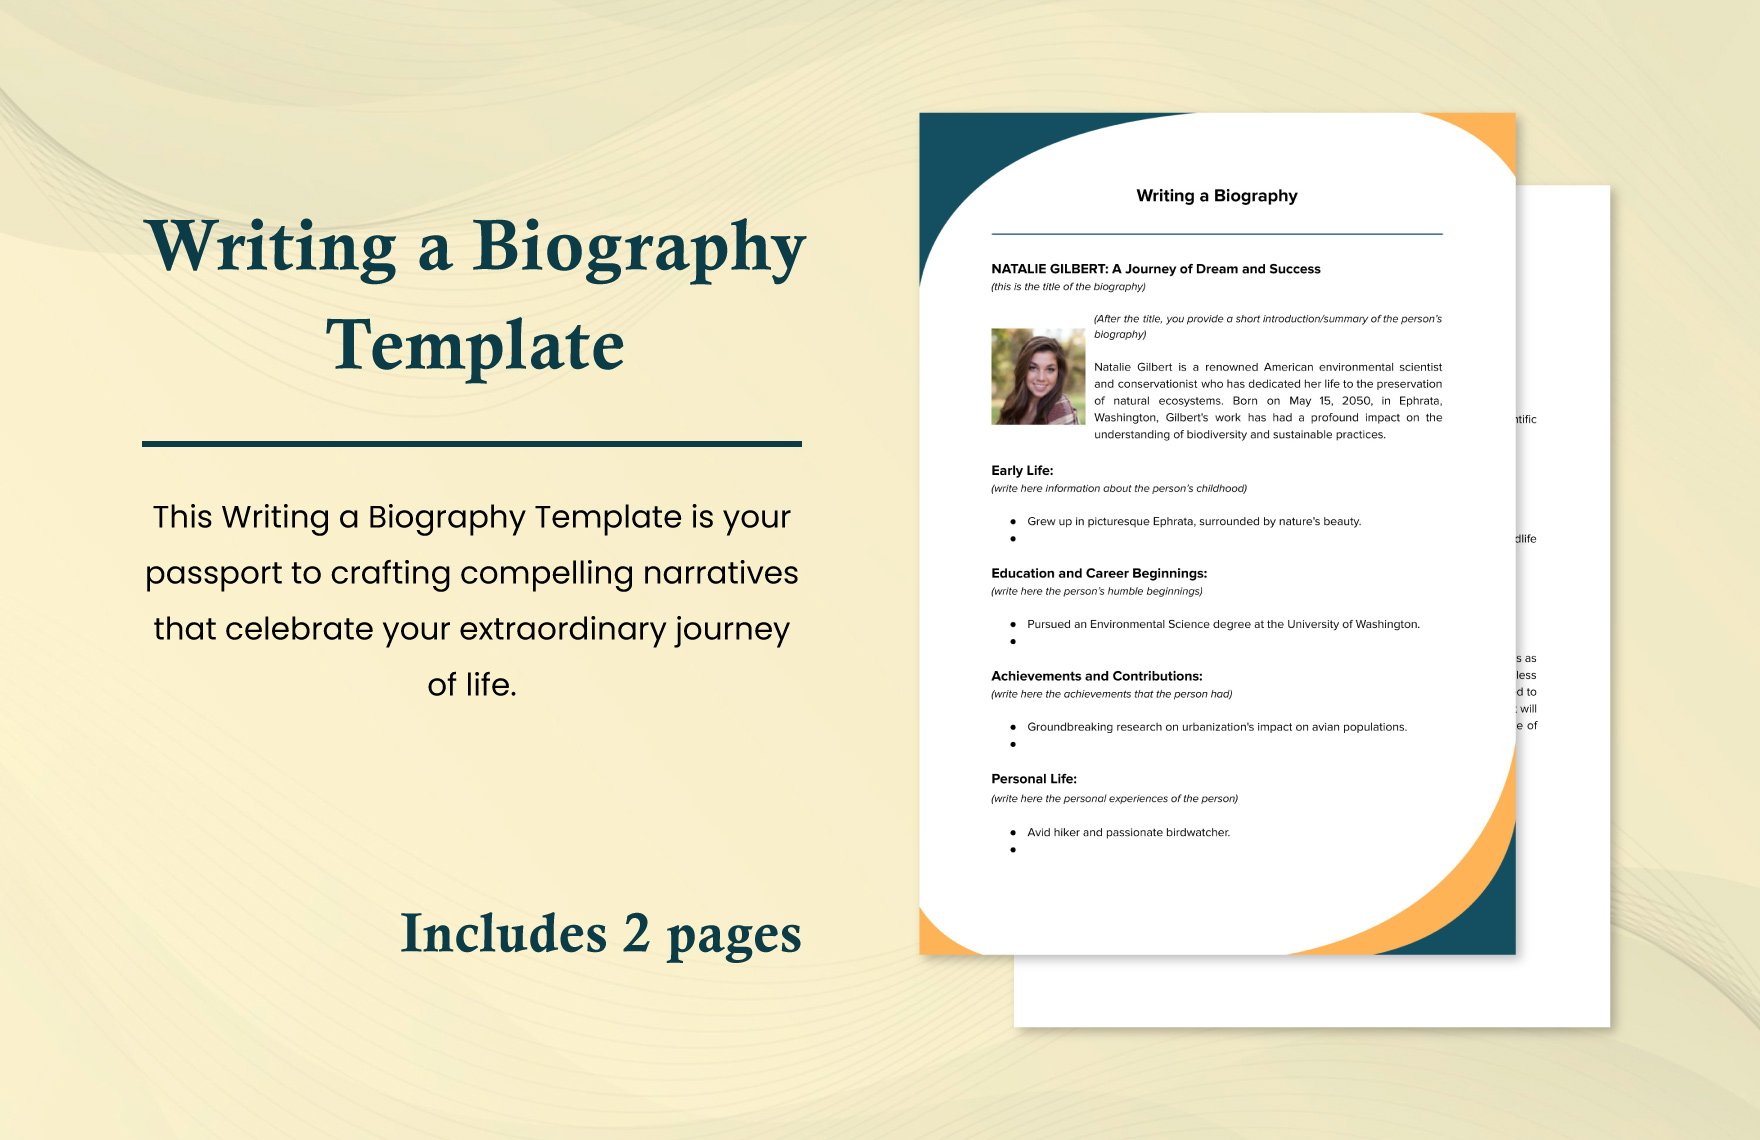 Writing a Biography Template